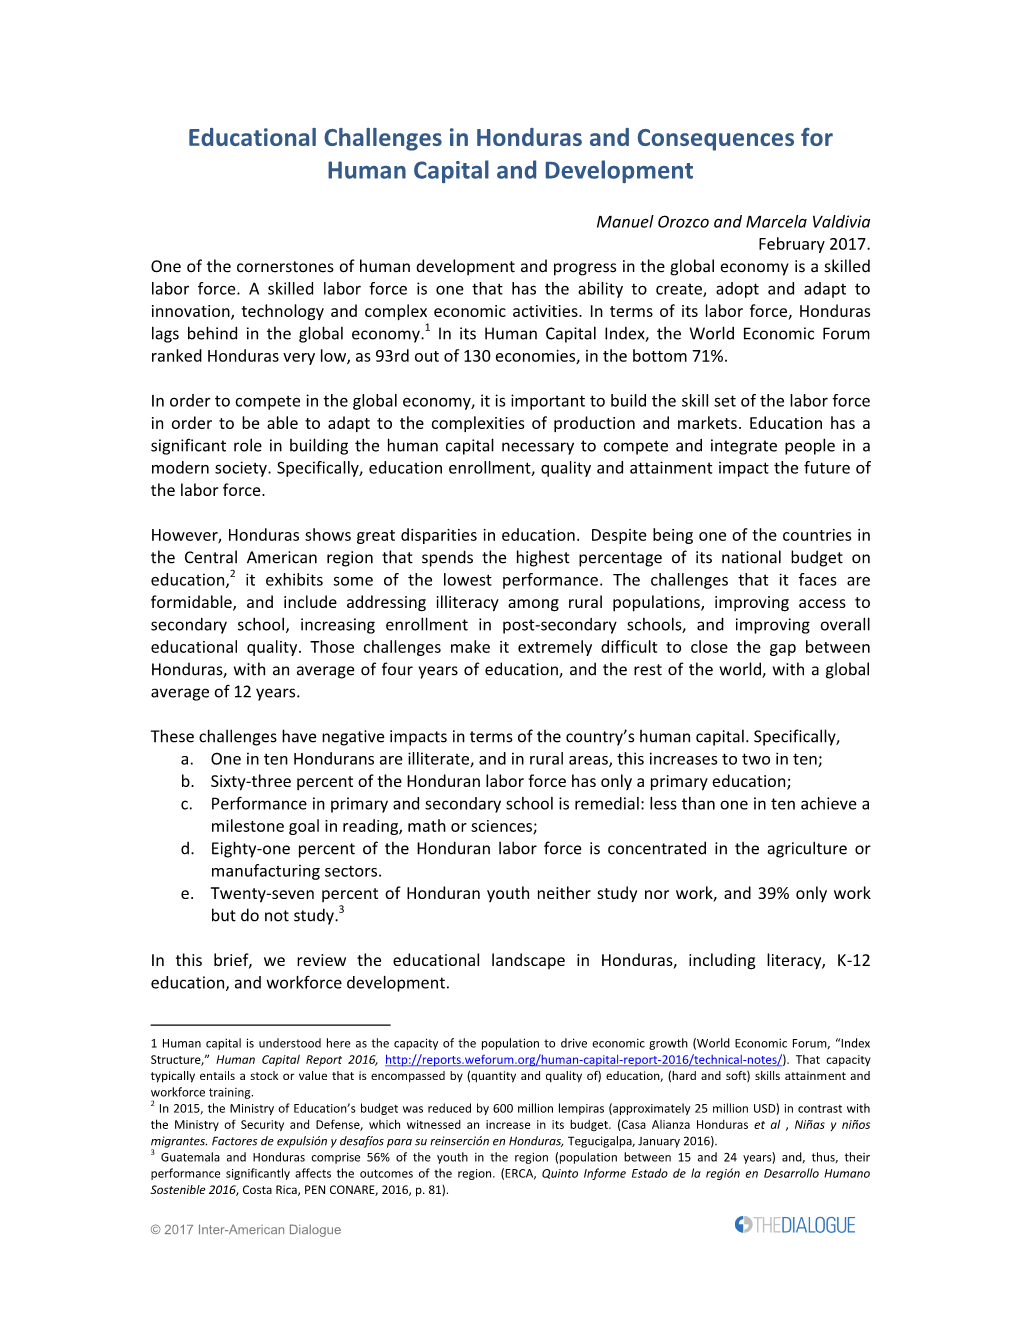 Educational Challenges in Honduras and Consequences for Human Capital and Development